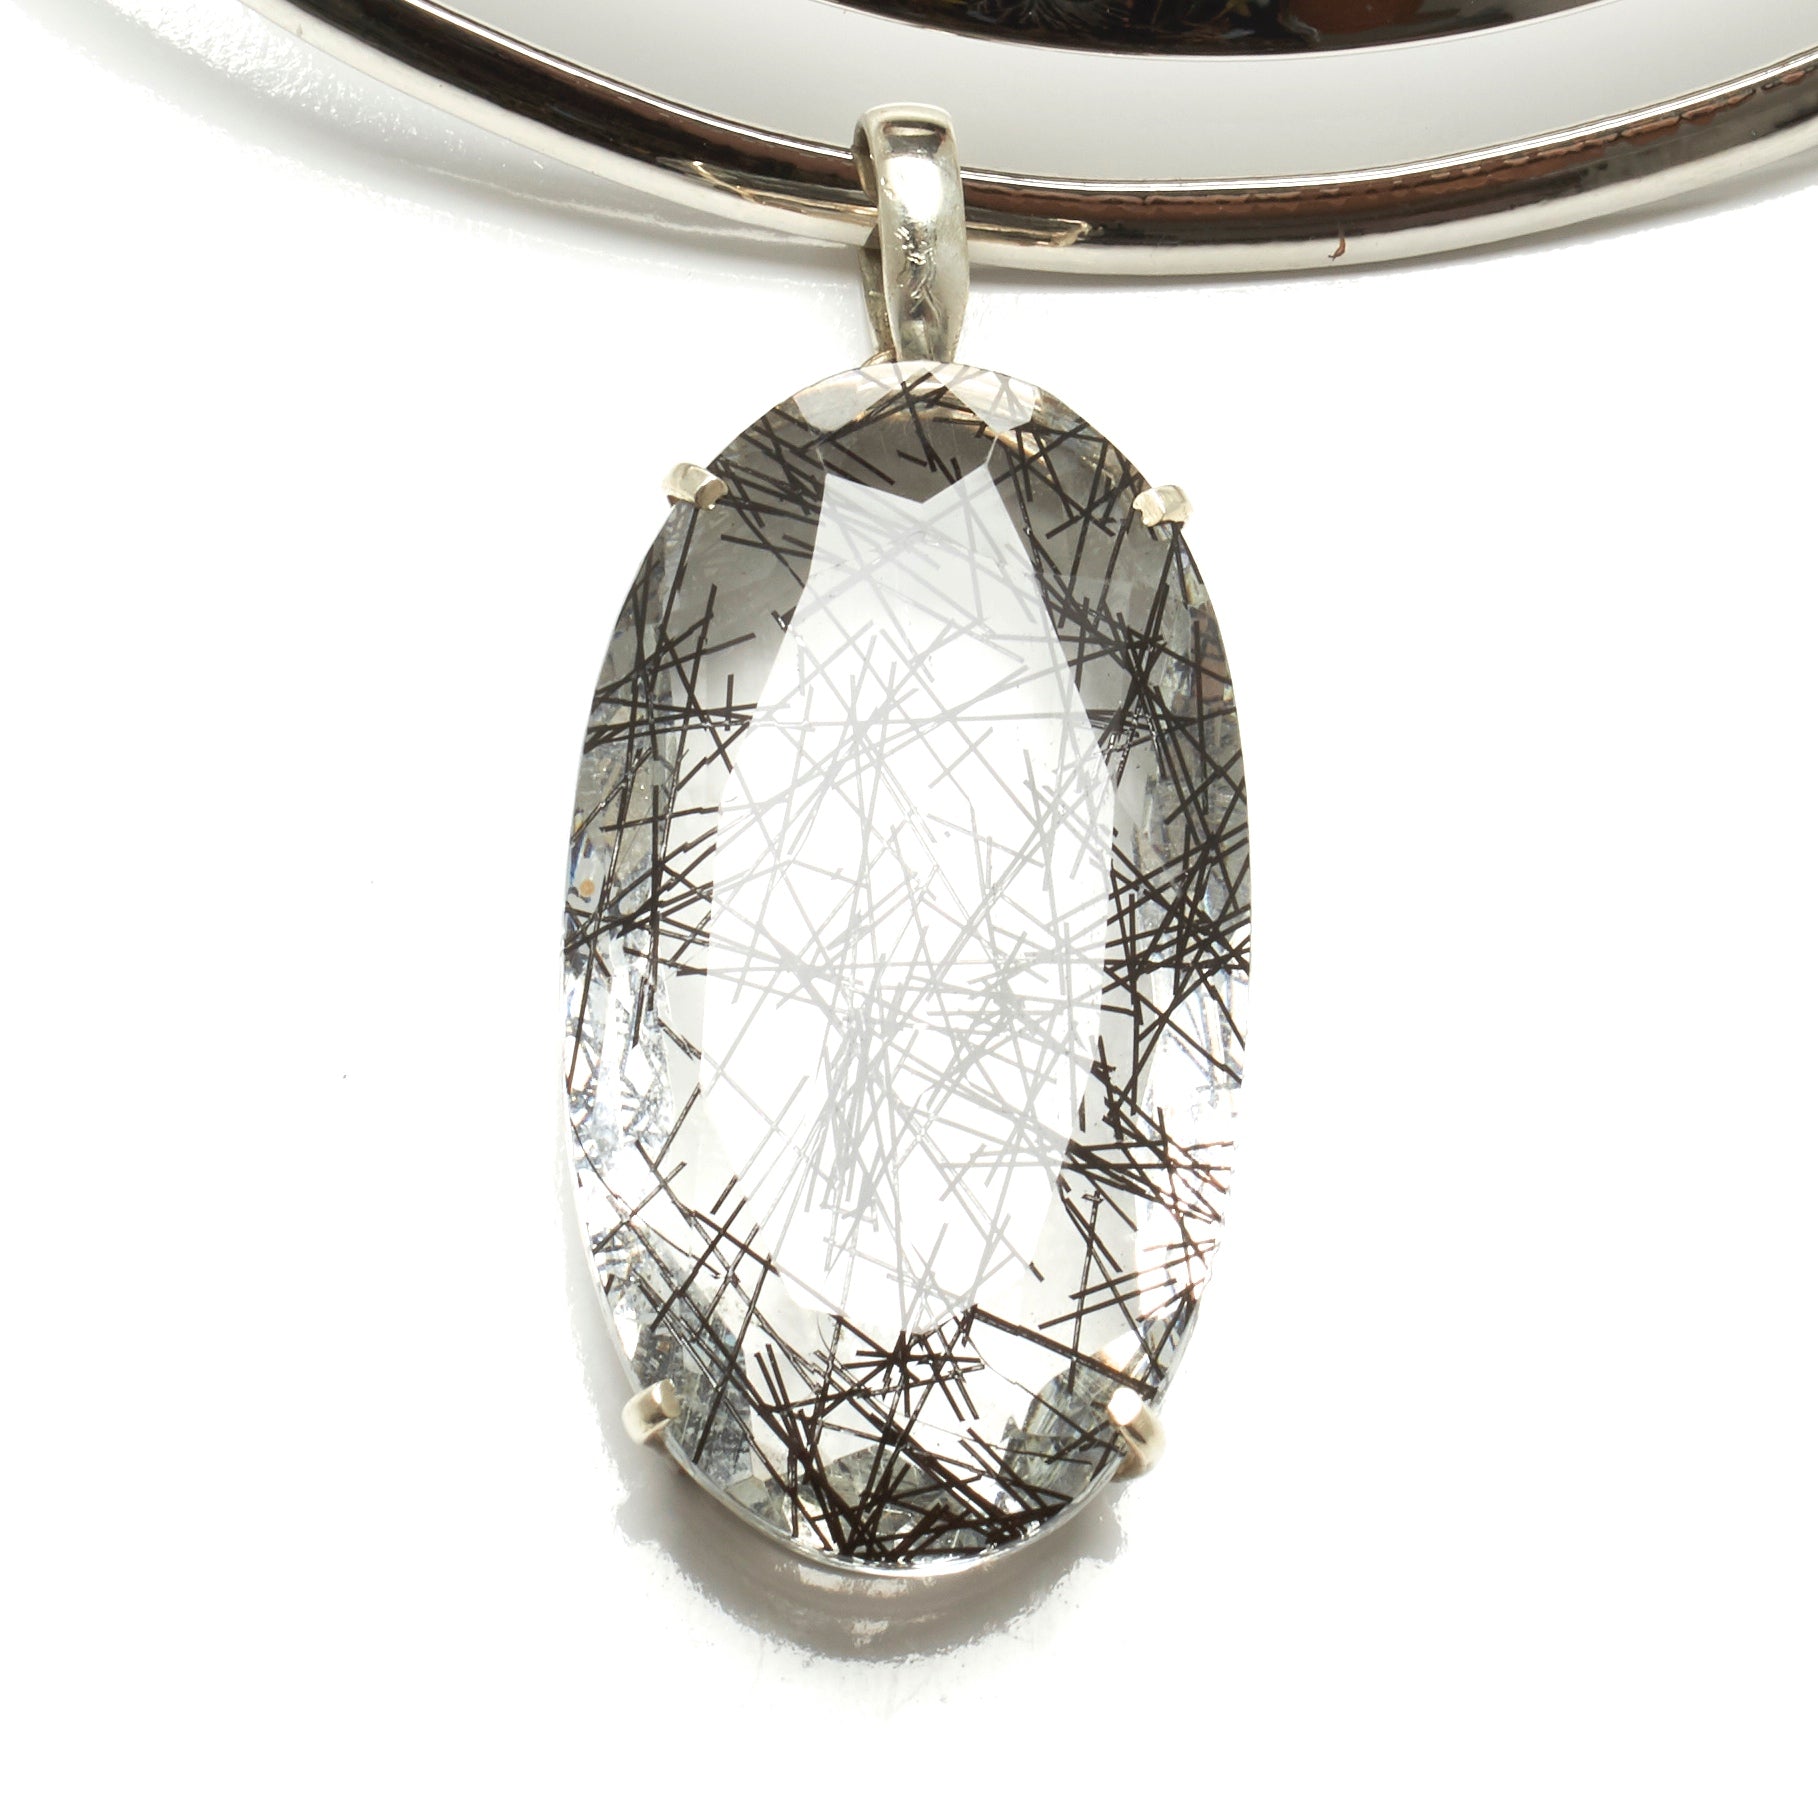 THICK TORQUE NECKLACE WITH LARGE TOURMALINATED QUARTZ PENDENT. BY NYET JEWELRY